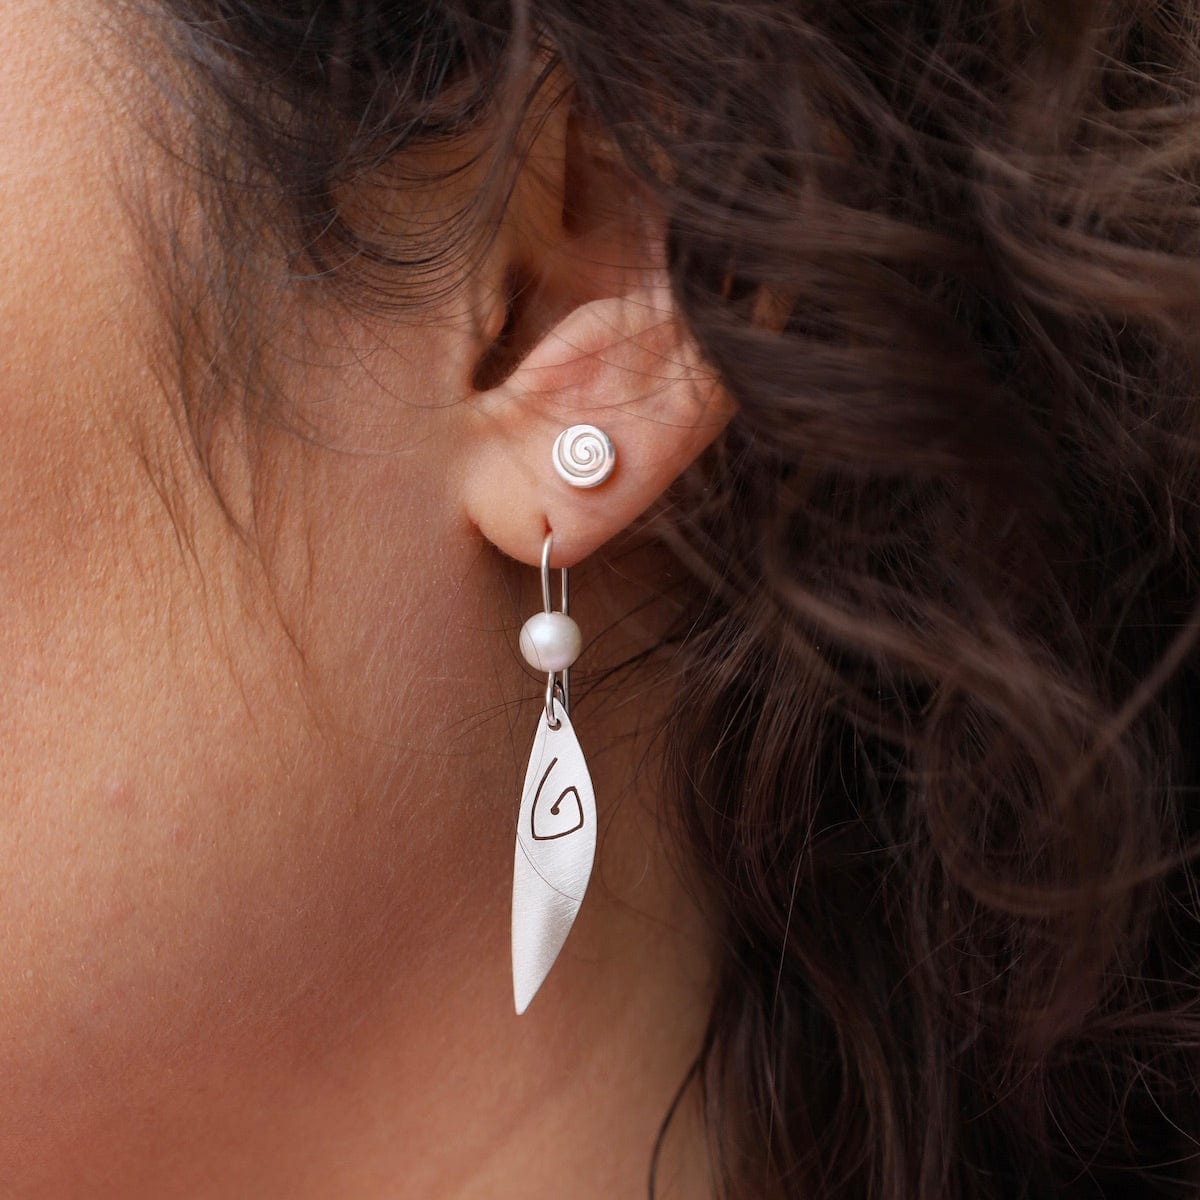 EAR Elongated Matte Silver Earrings with Cut-Out and Pearl